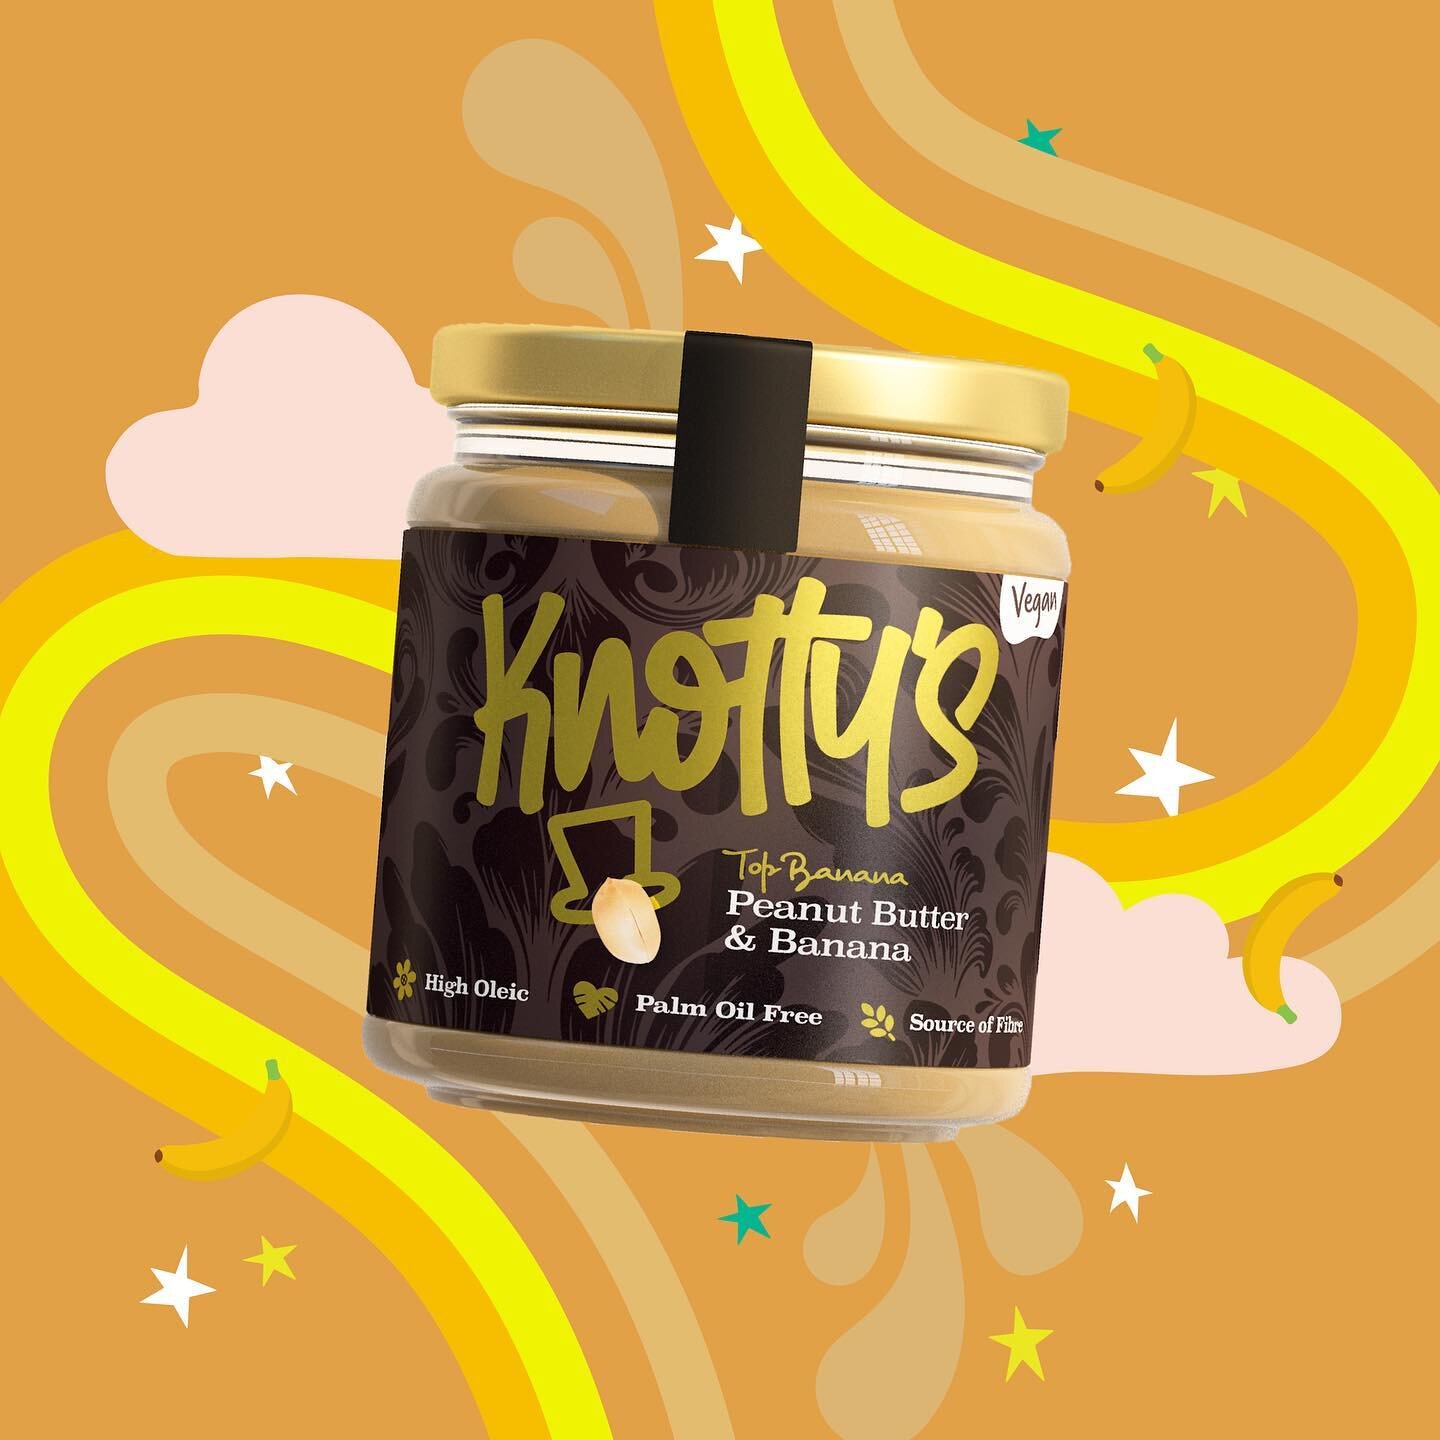 🍌 Top Banana 🍌 

A tropical taste tornado, this is a nut butter like you've never tasted 😋

Roasted peanuts deliciously dance with sweet banana chips and coconut cream flakes for a truly tantalising treat 💛 

Shop online at Knottys.co.uk shopping